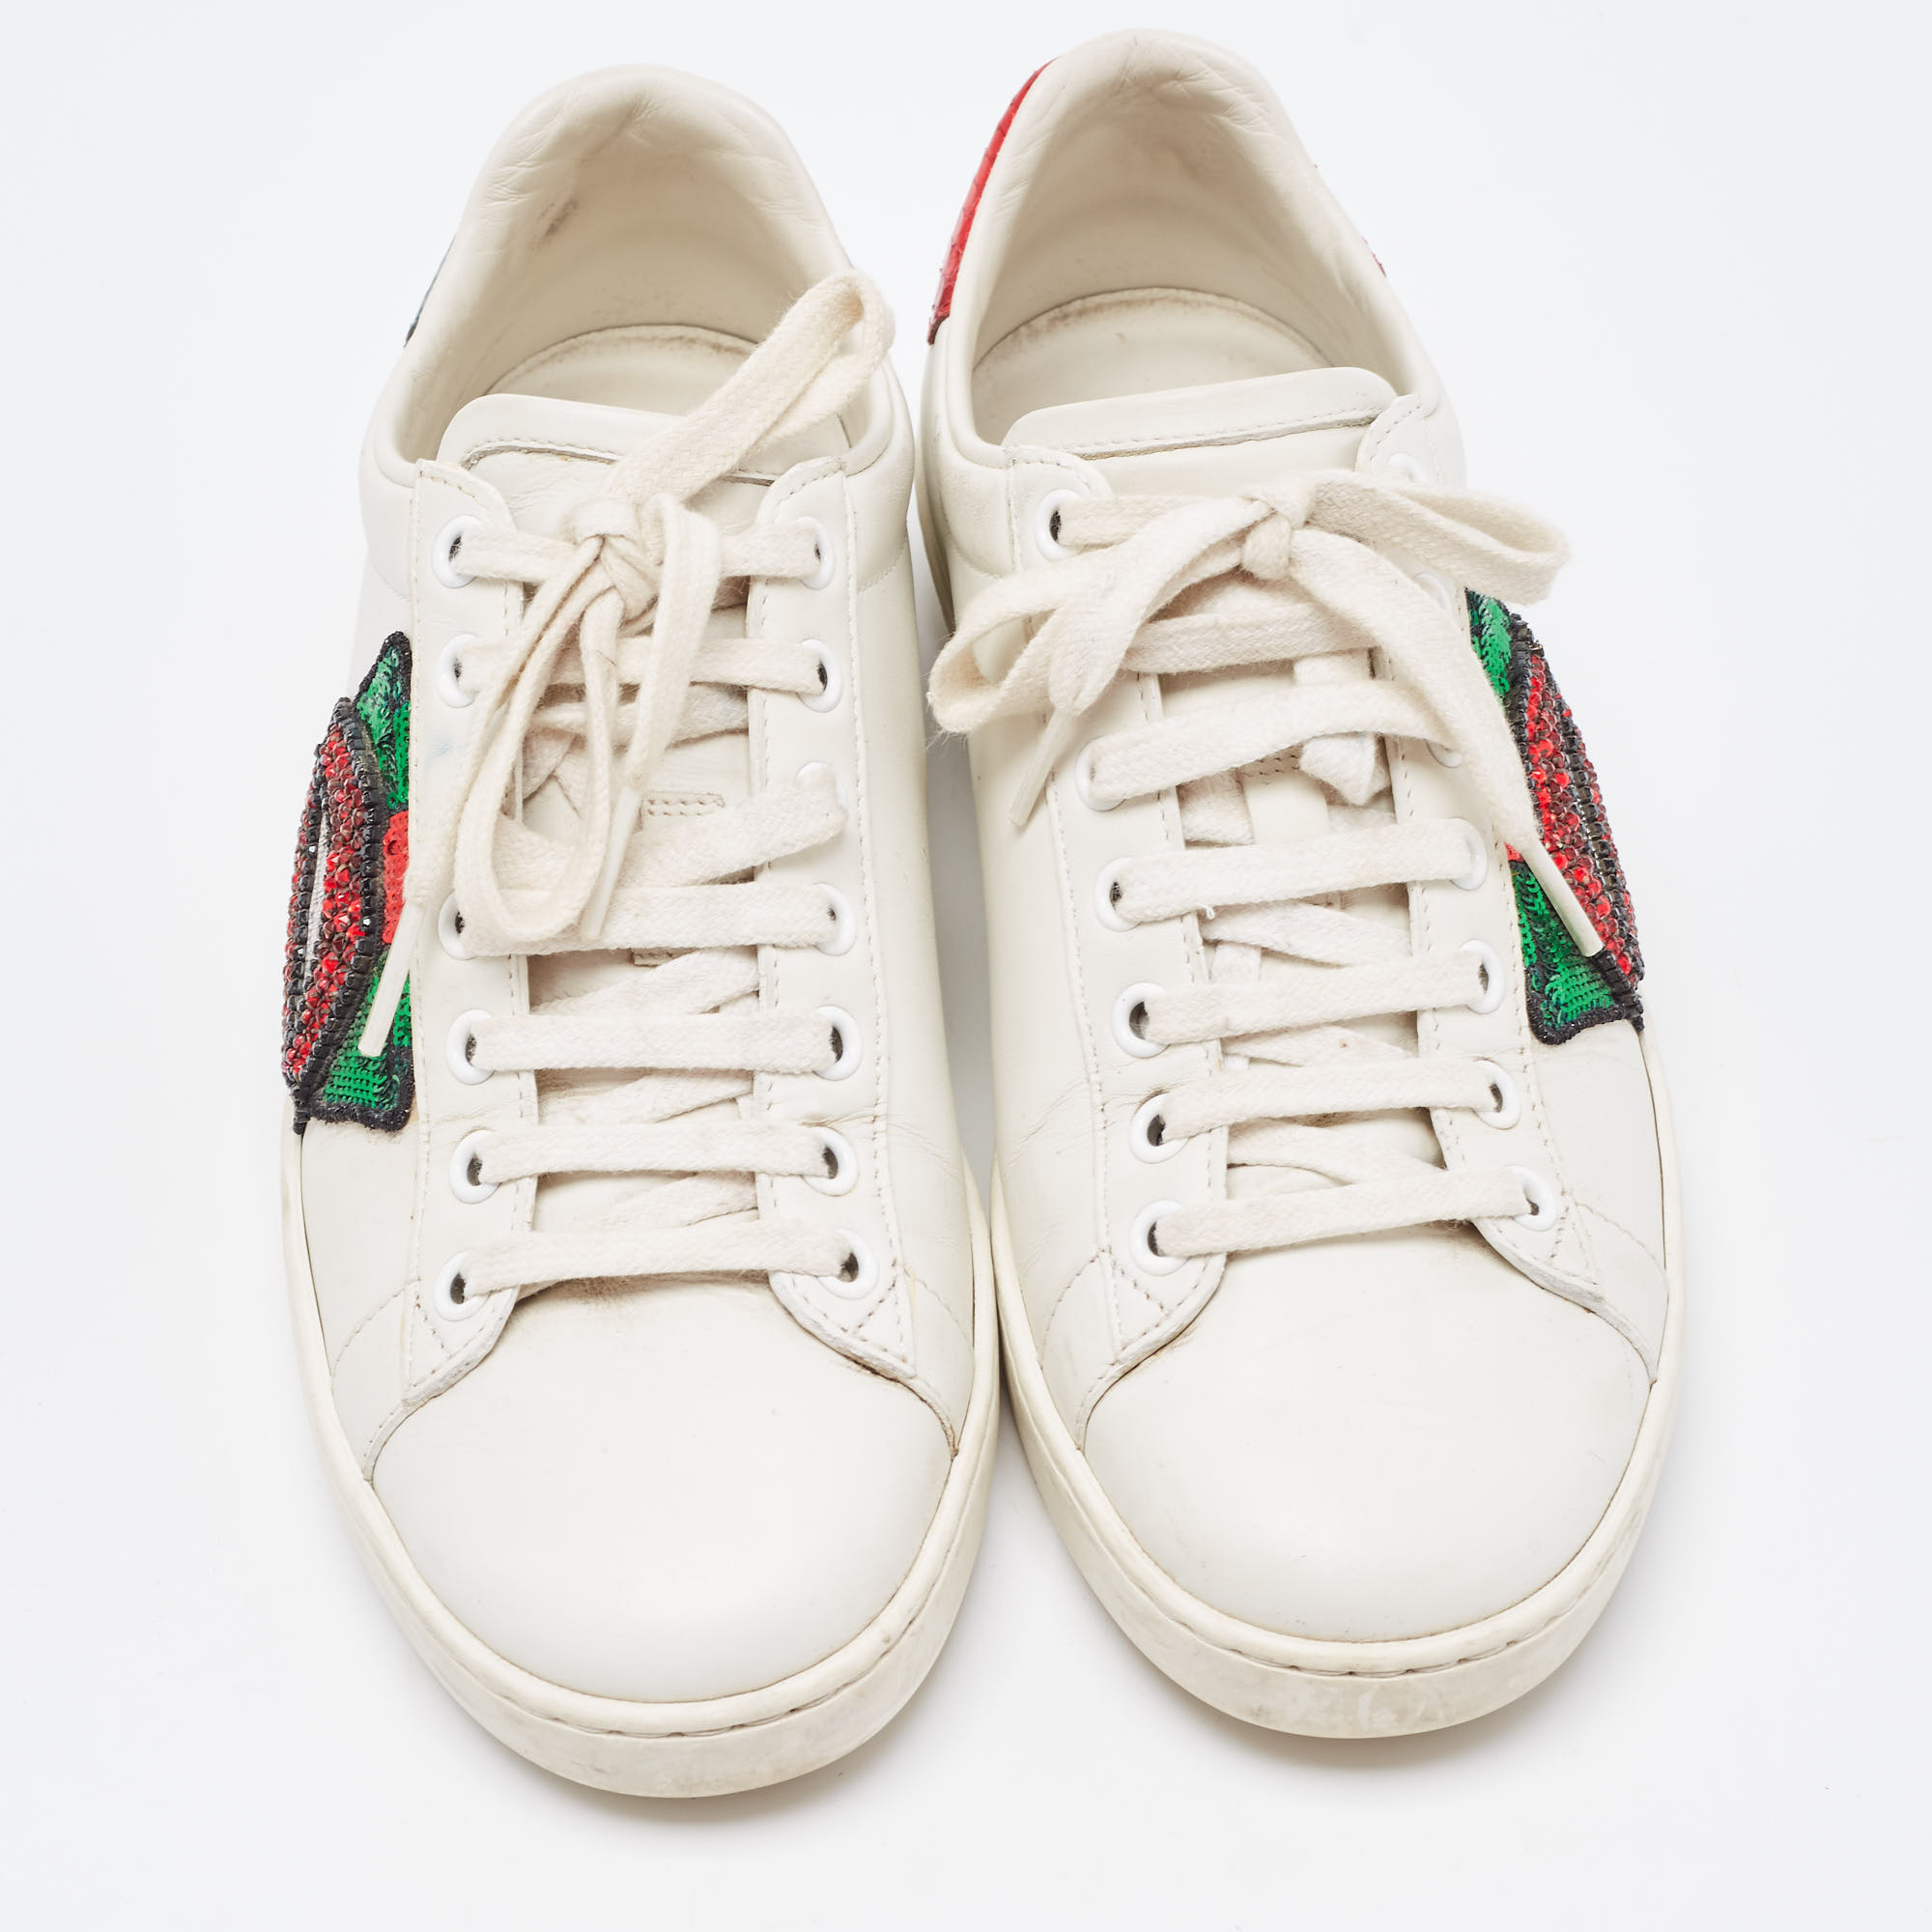 Gucci White Leather Embellished Lip Ace Sneakers Size 36